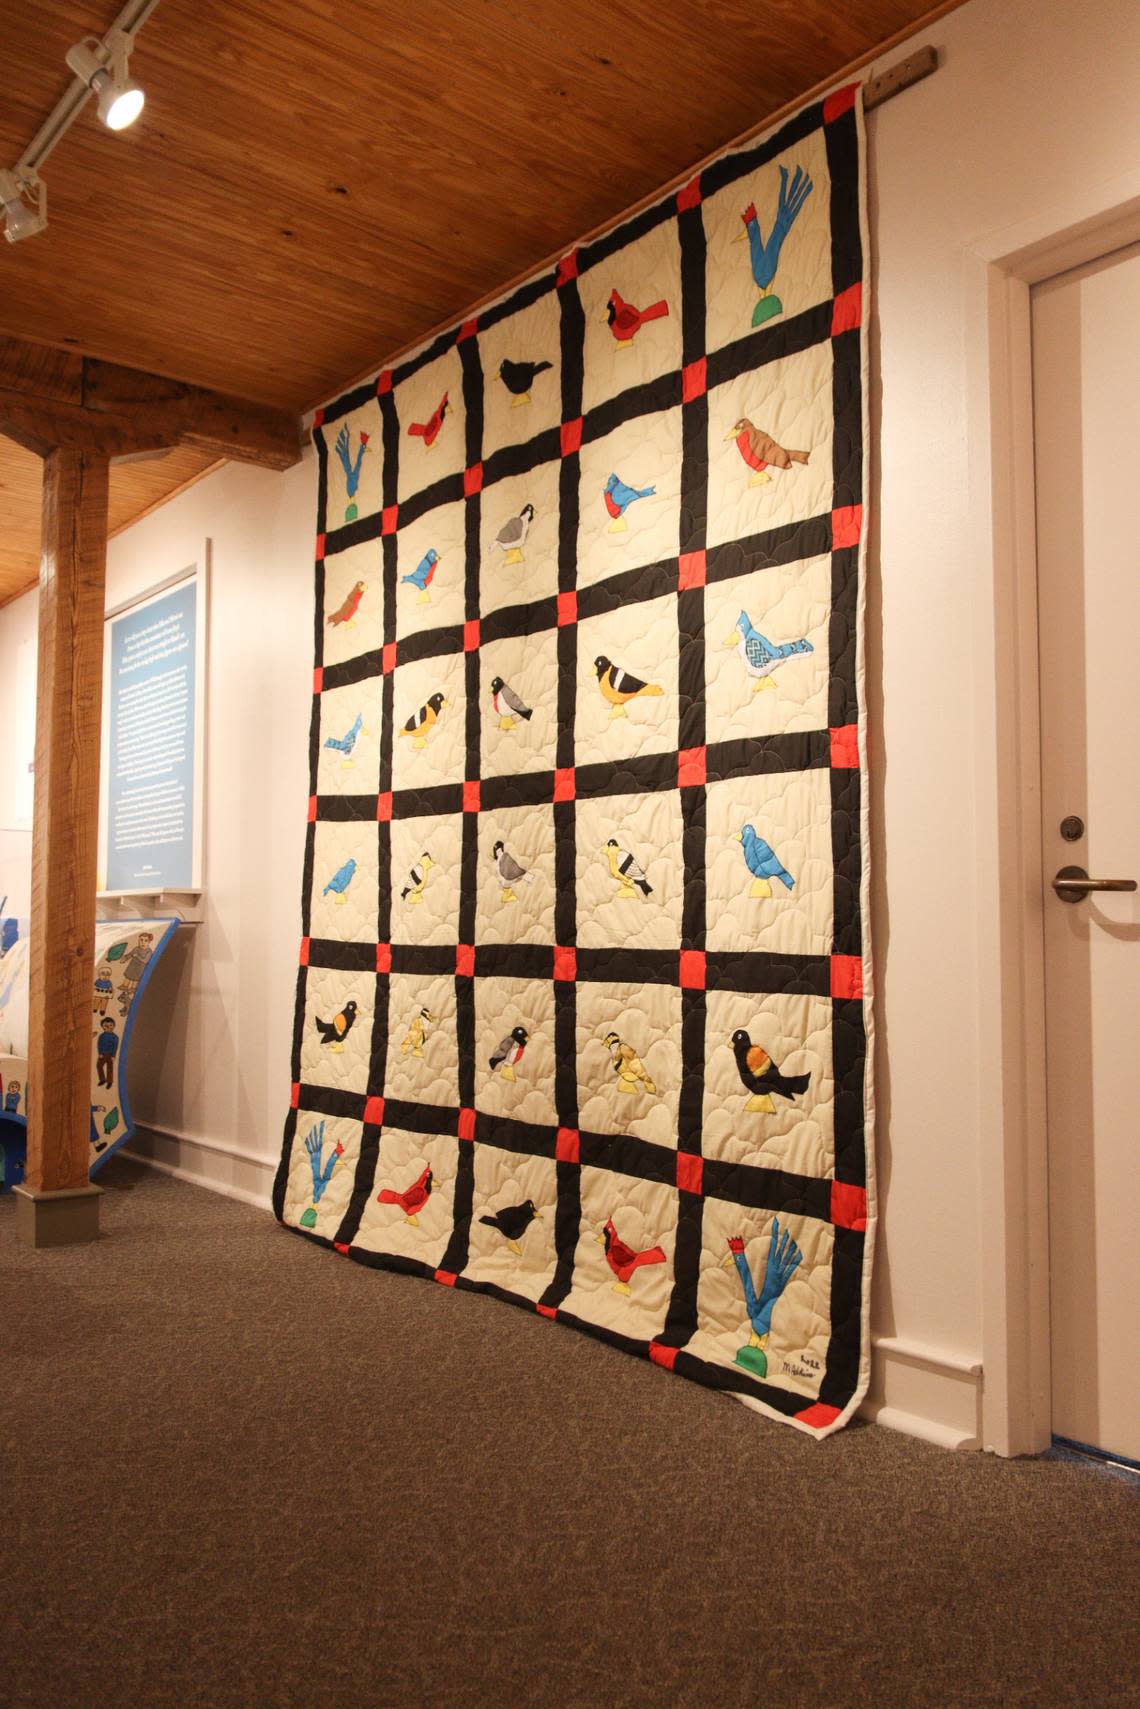 The Minnie Adkins exhibit includes a hand-made quilt. Adkins created characters for Mike Norris’ books, including “Bright Blue Rooster,” “Ring Around the Moon” and “Sonny the Monkey.”